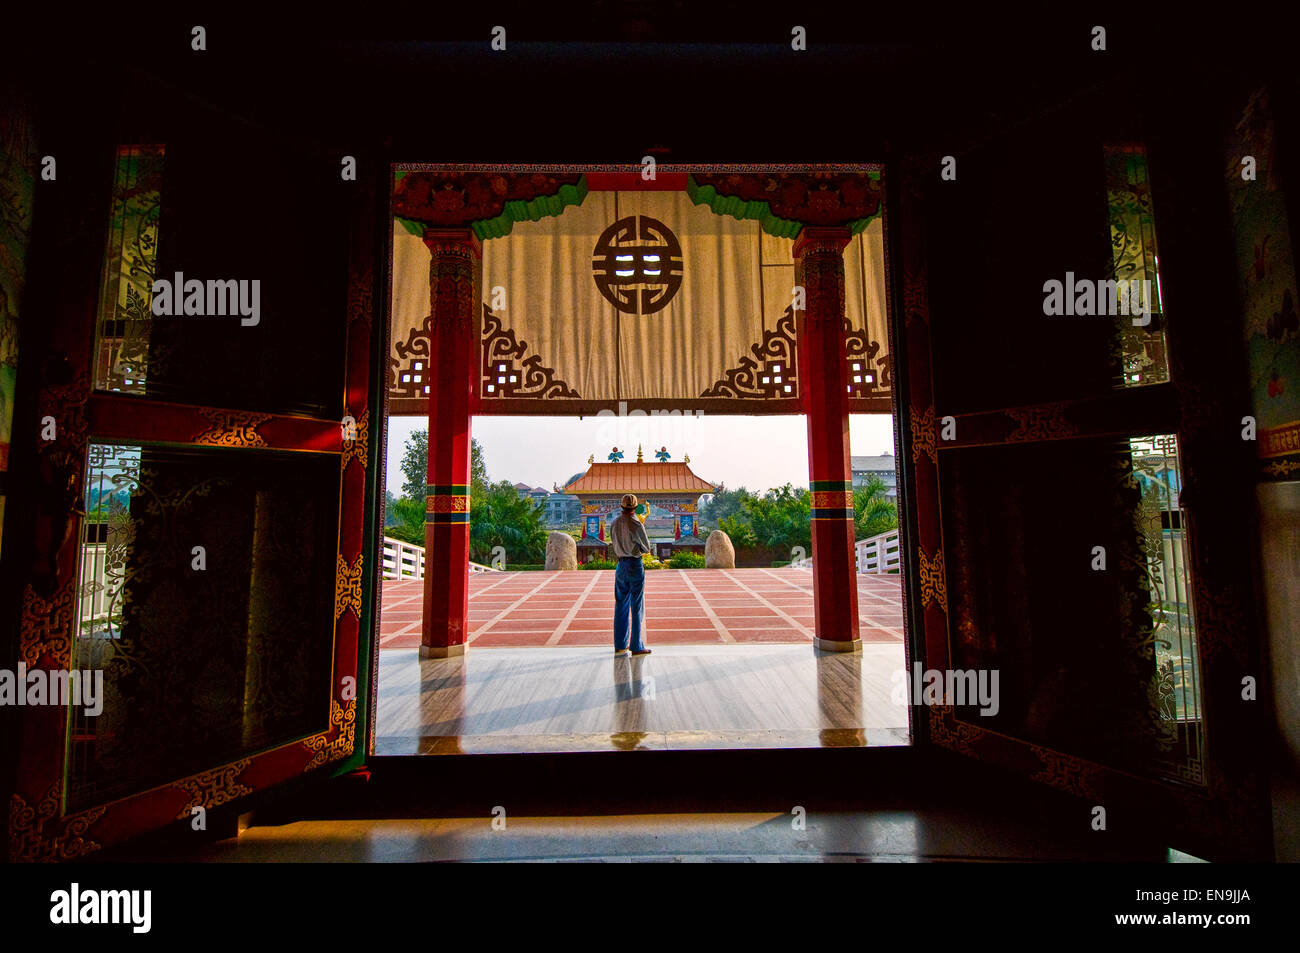 Someone said that there is no German buddhism. It is actually a Tibetan temple. The only thing coming from Germany is money :-) Stock Photo